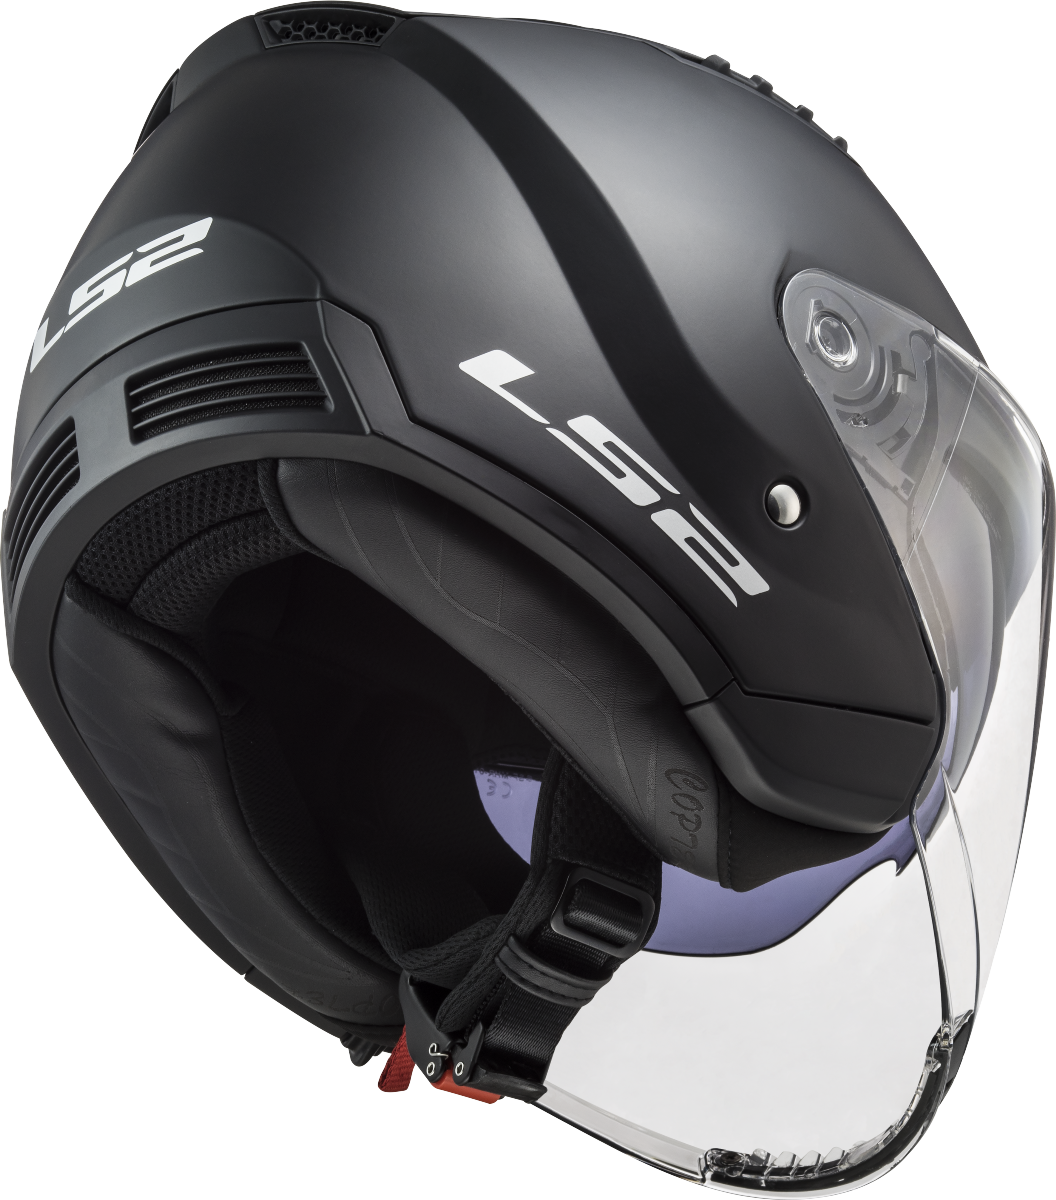 Casco LS2 OF600 COPTER SOLID NEGRO MATE 9